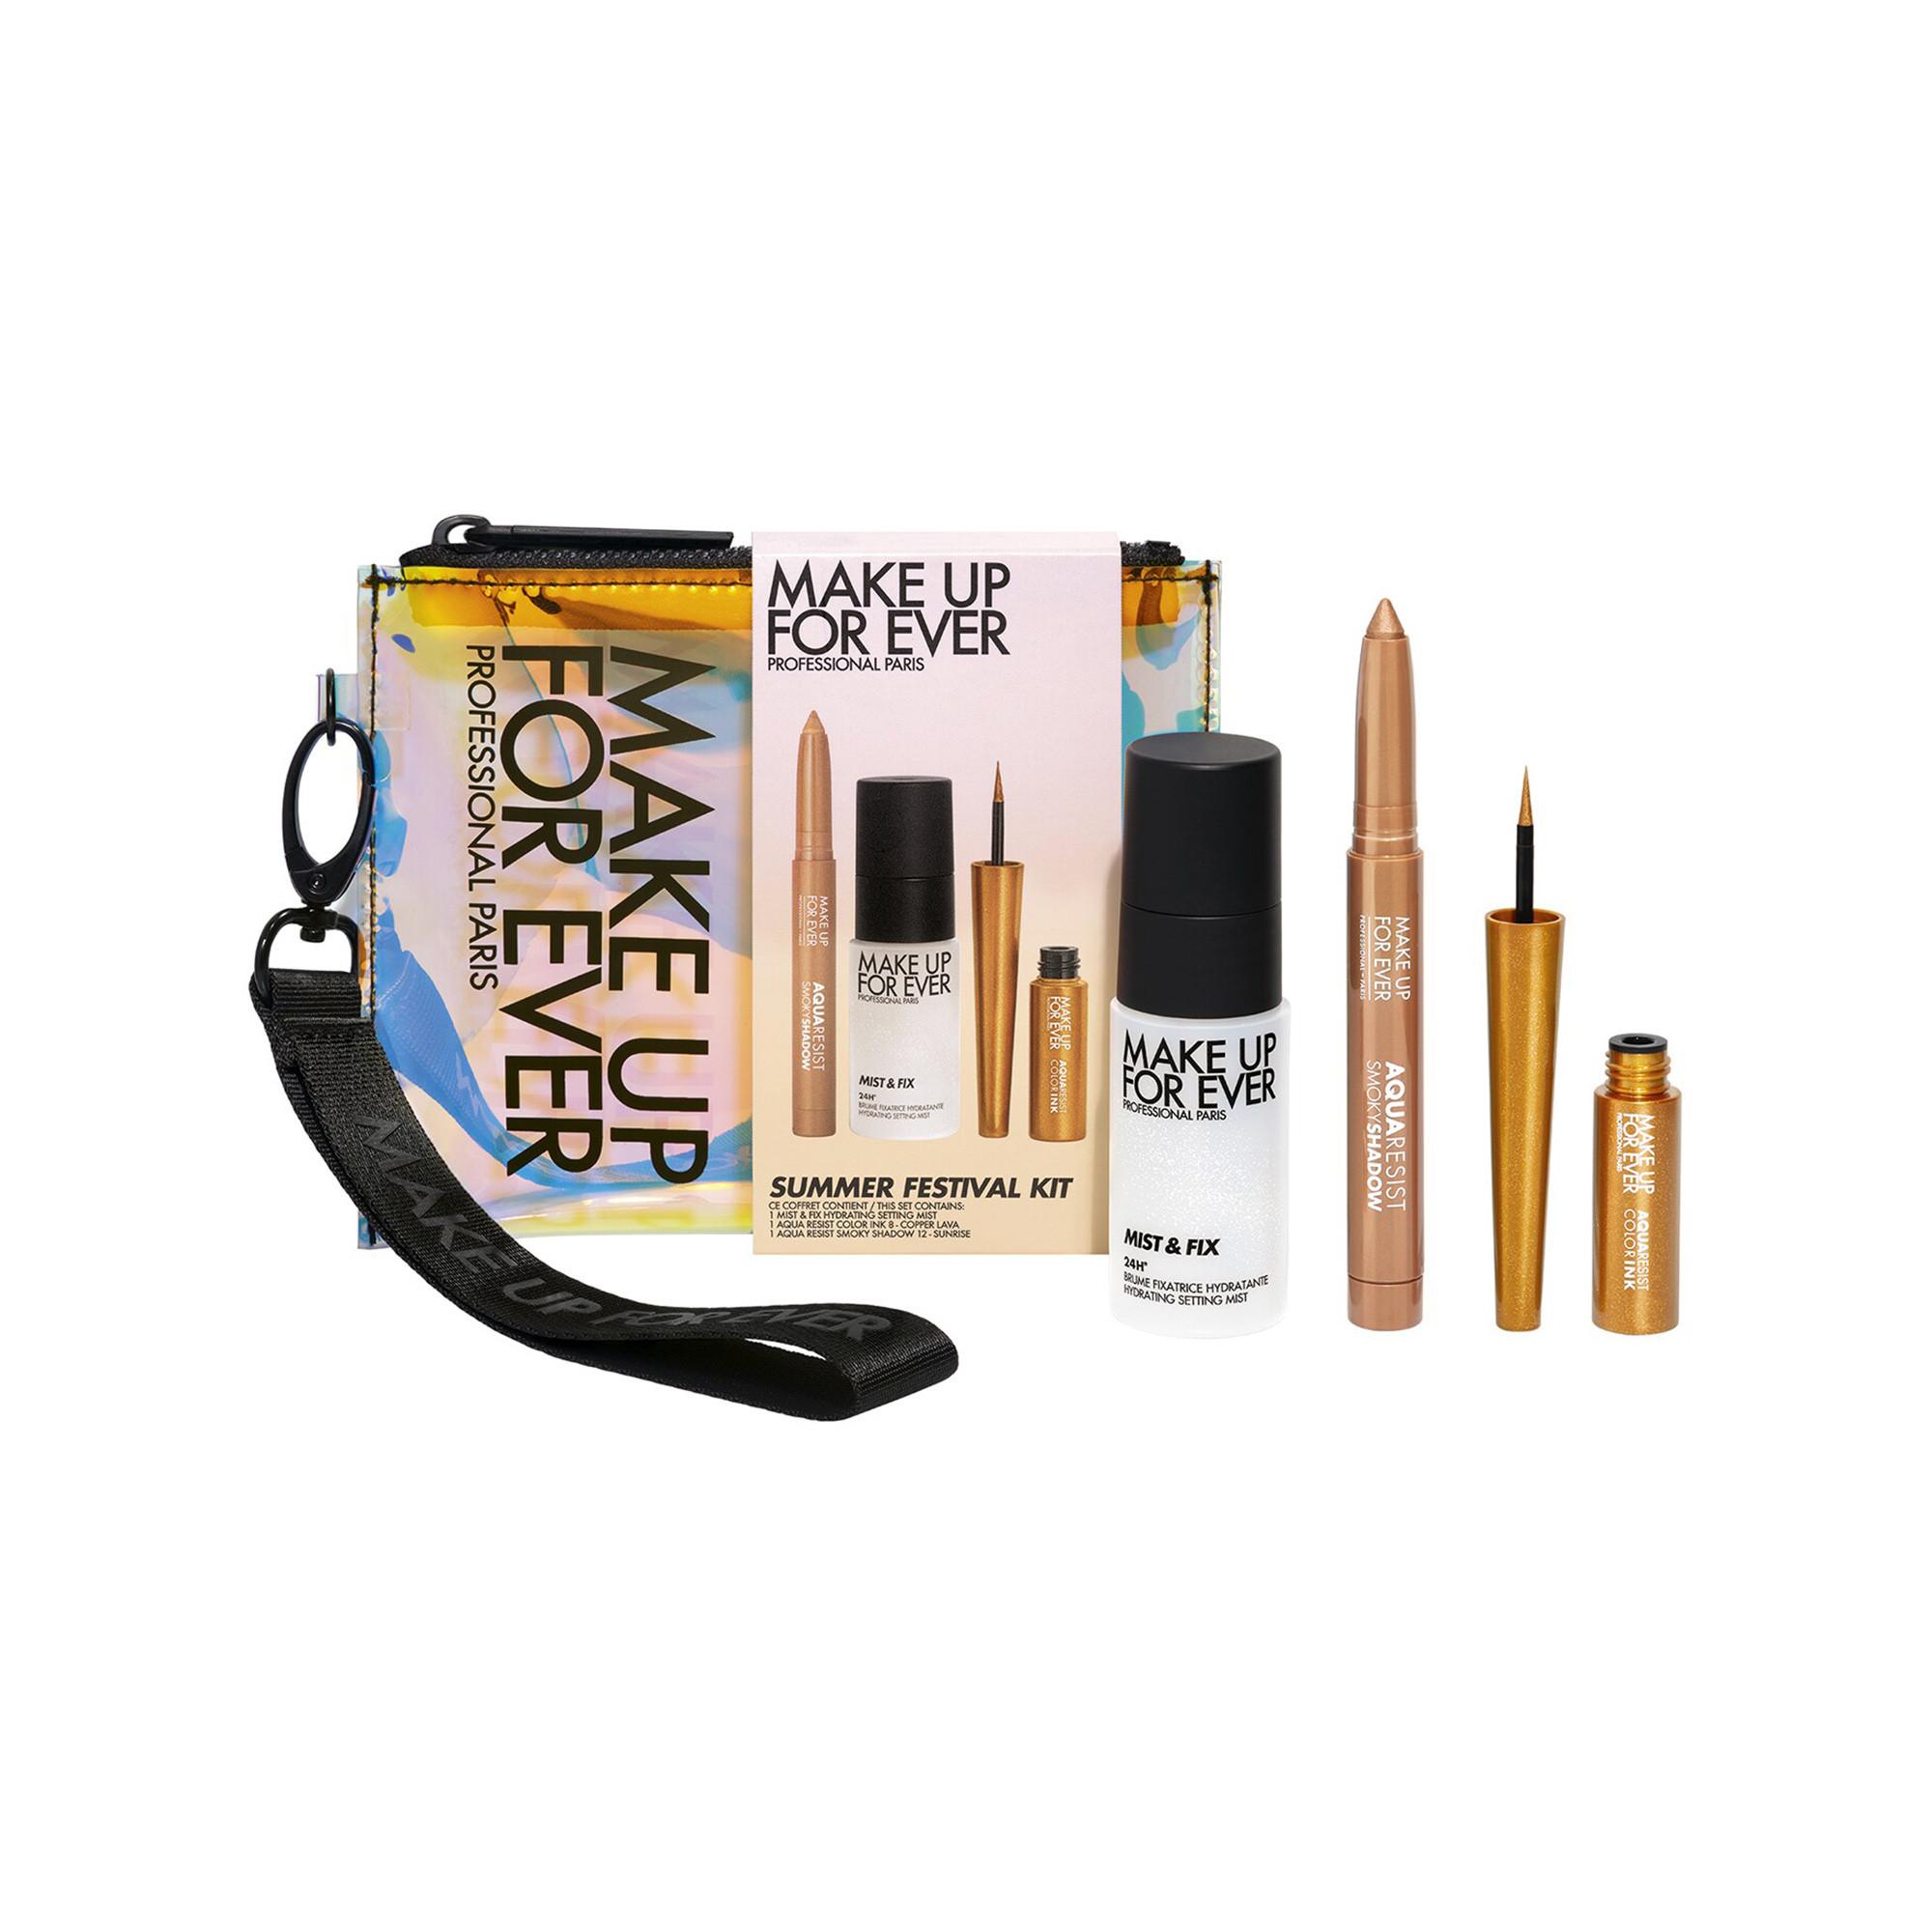 Make up For ever  Summer Festival Kit - Coffret maquillage yeux 